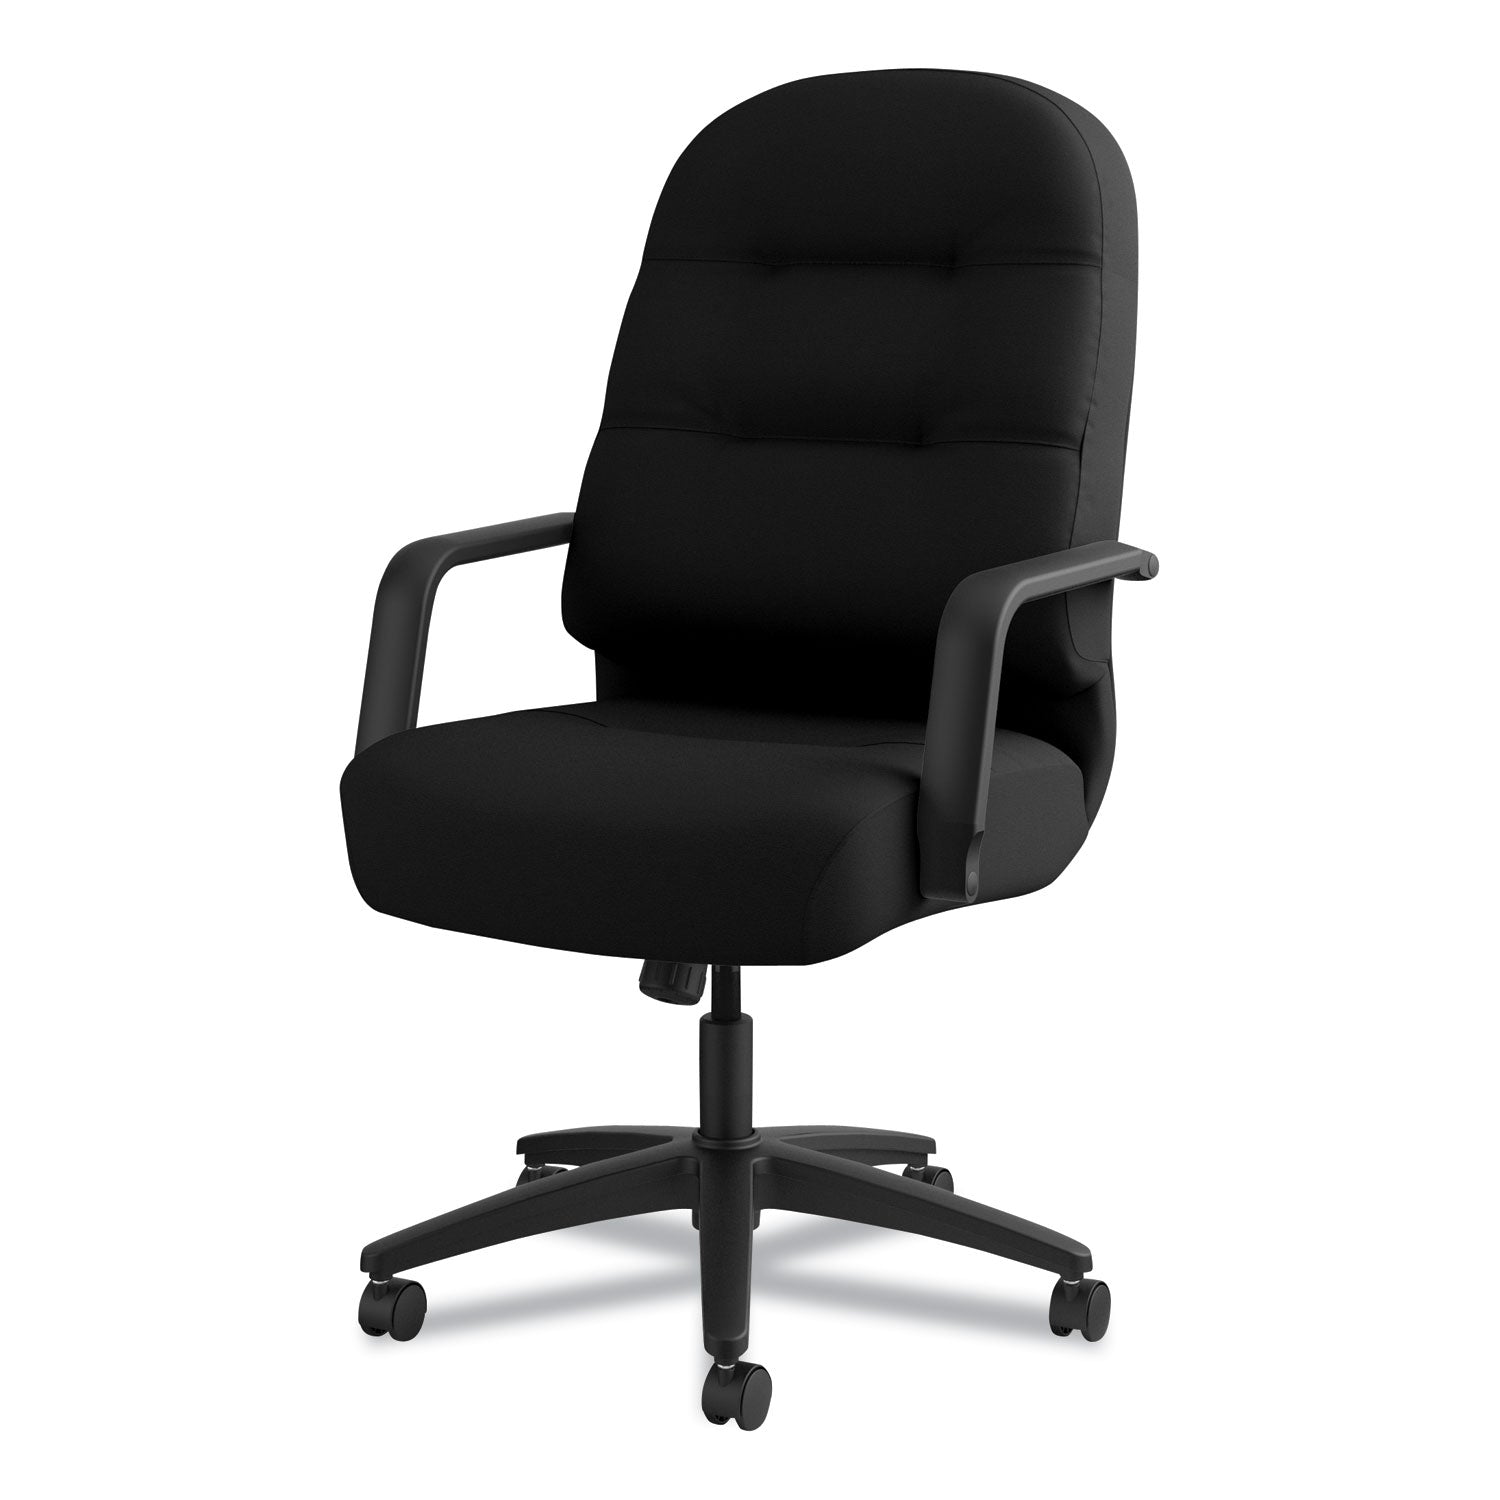 Pillow-Soft 2090 Series Executive High-Back Swivel/Tilt Chair, Supports Up to 300 lb, 17" to 21" Seat Height, Black - 3